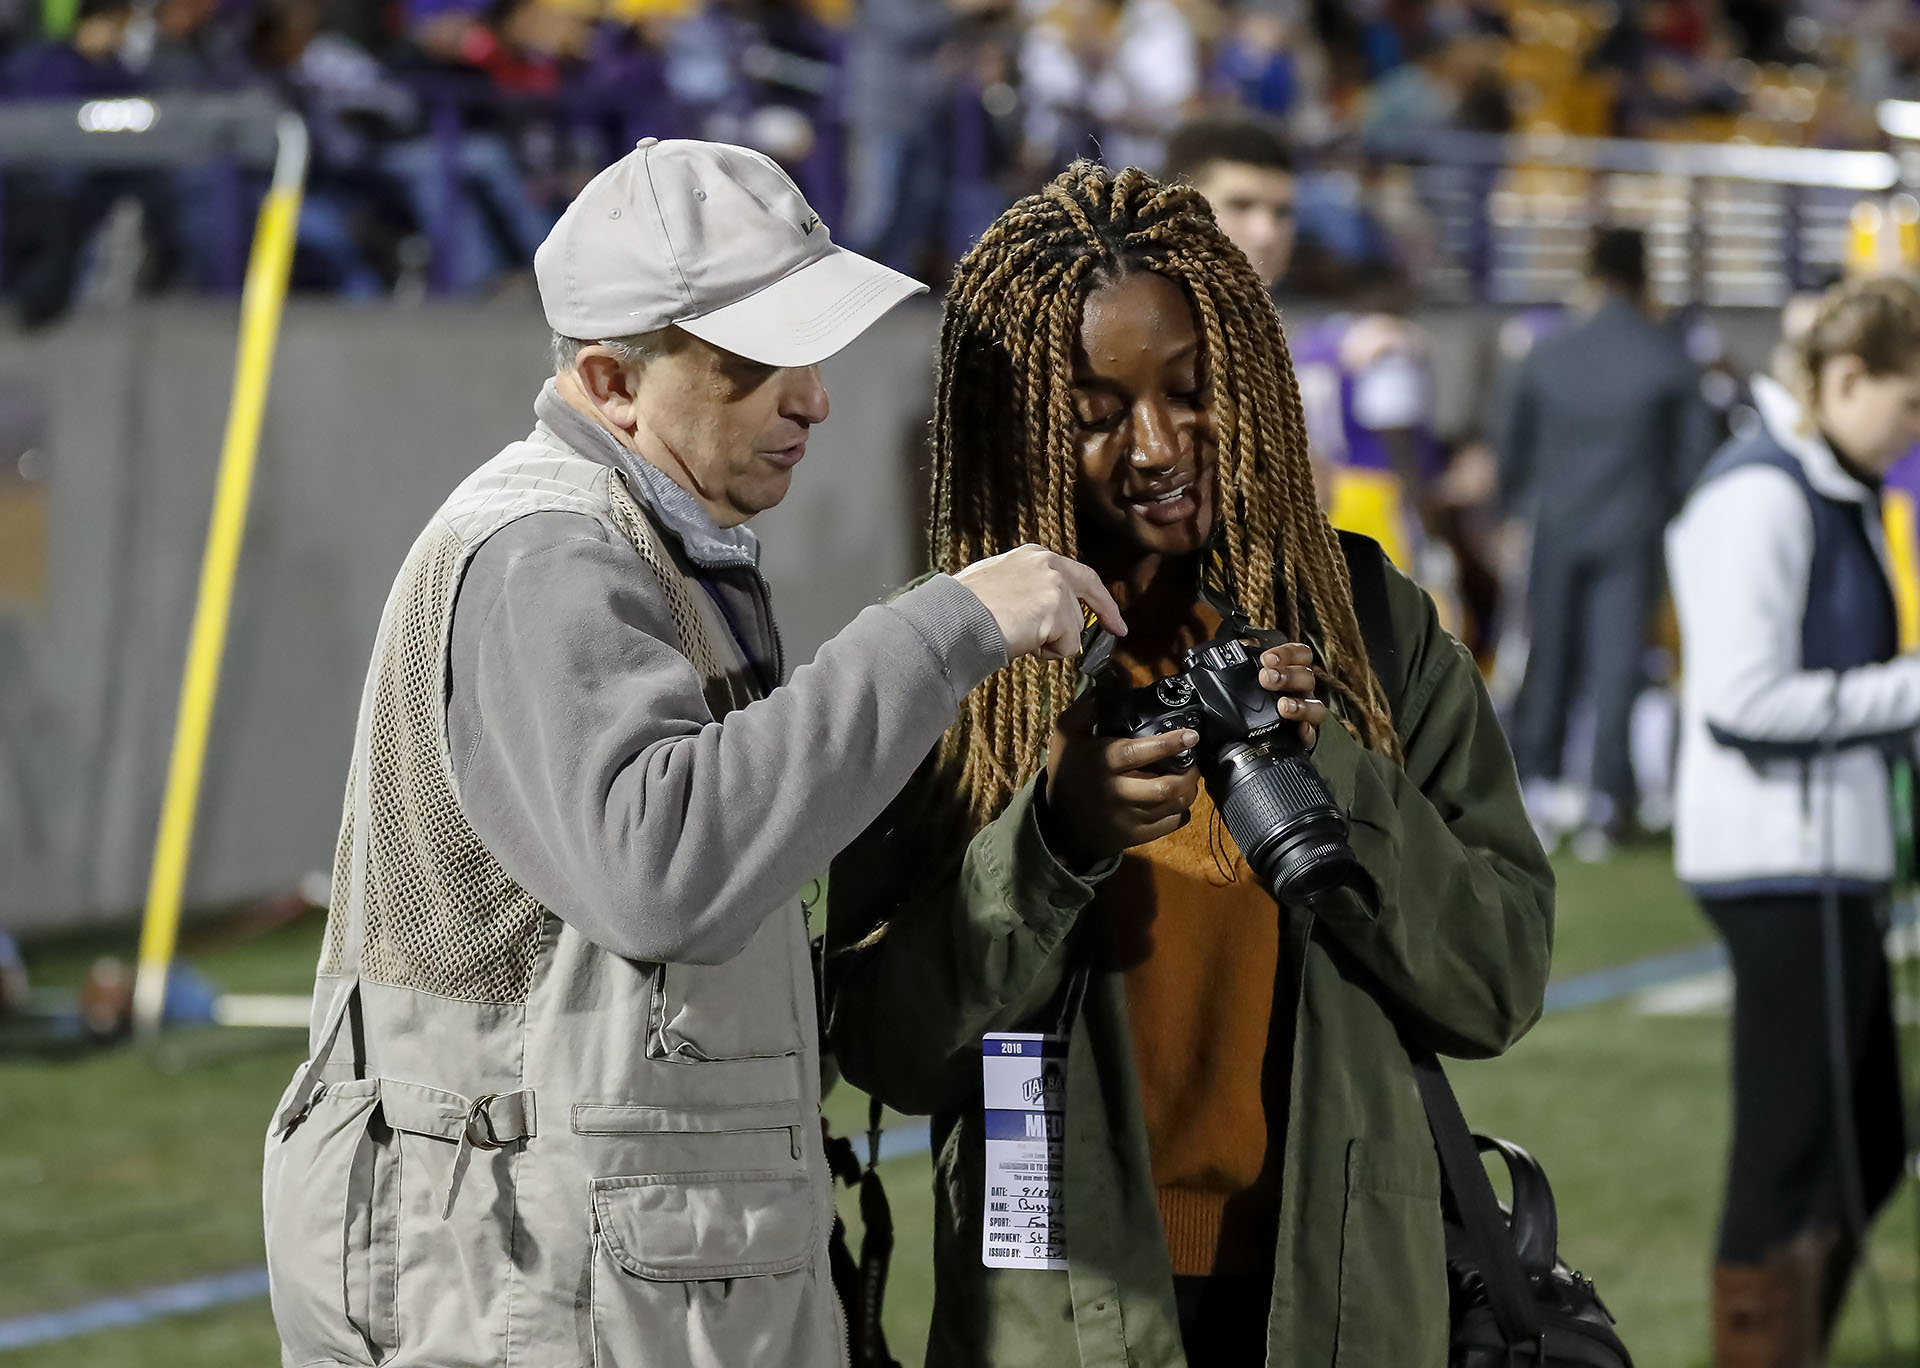 Communication student photographing a sporting event